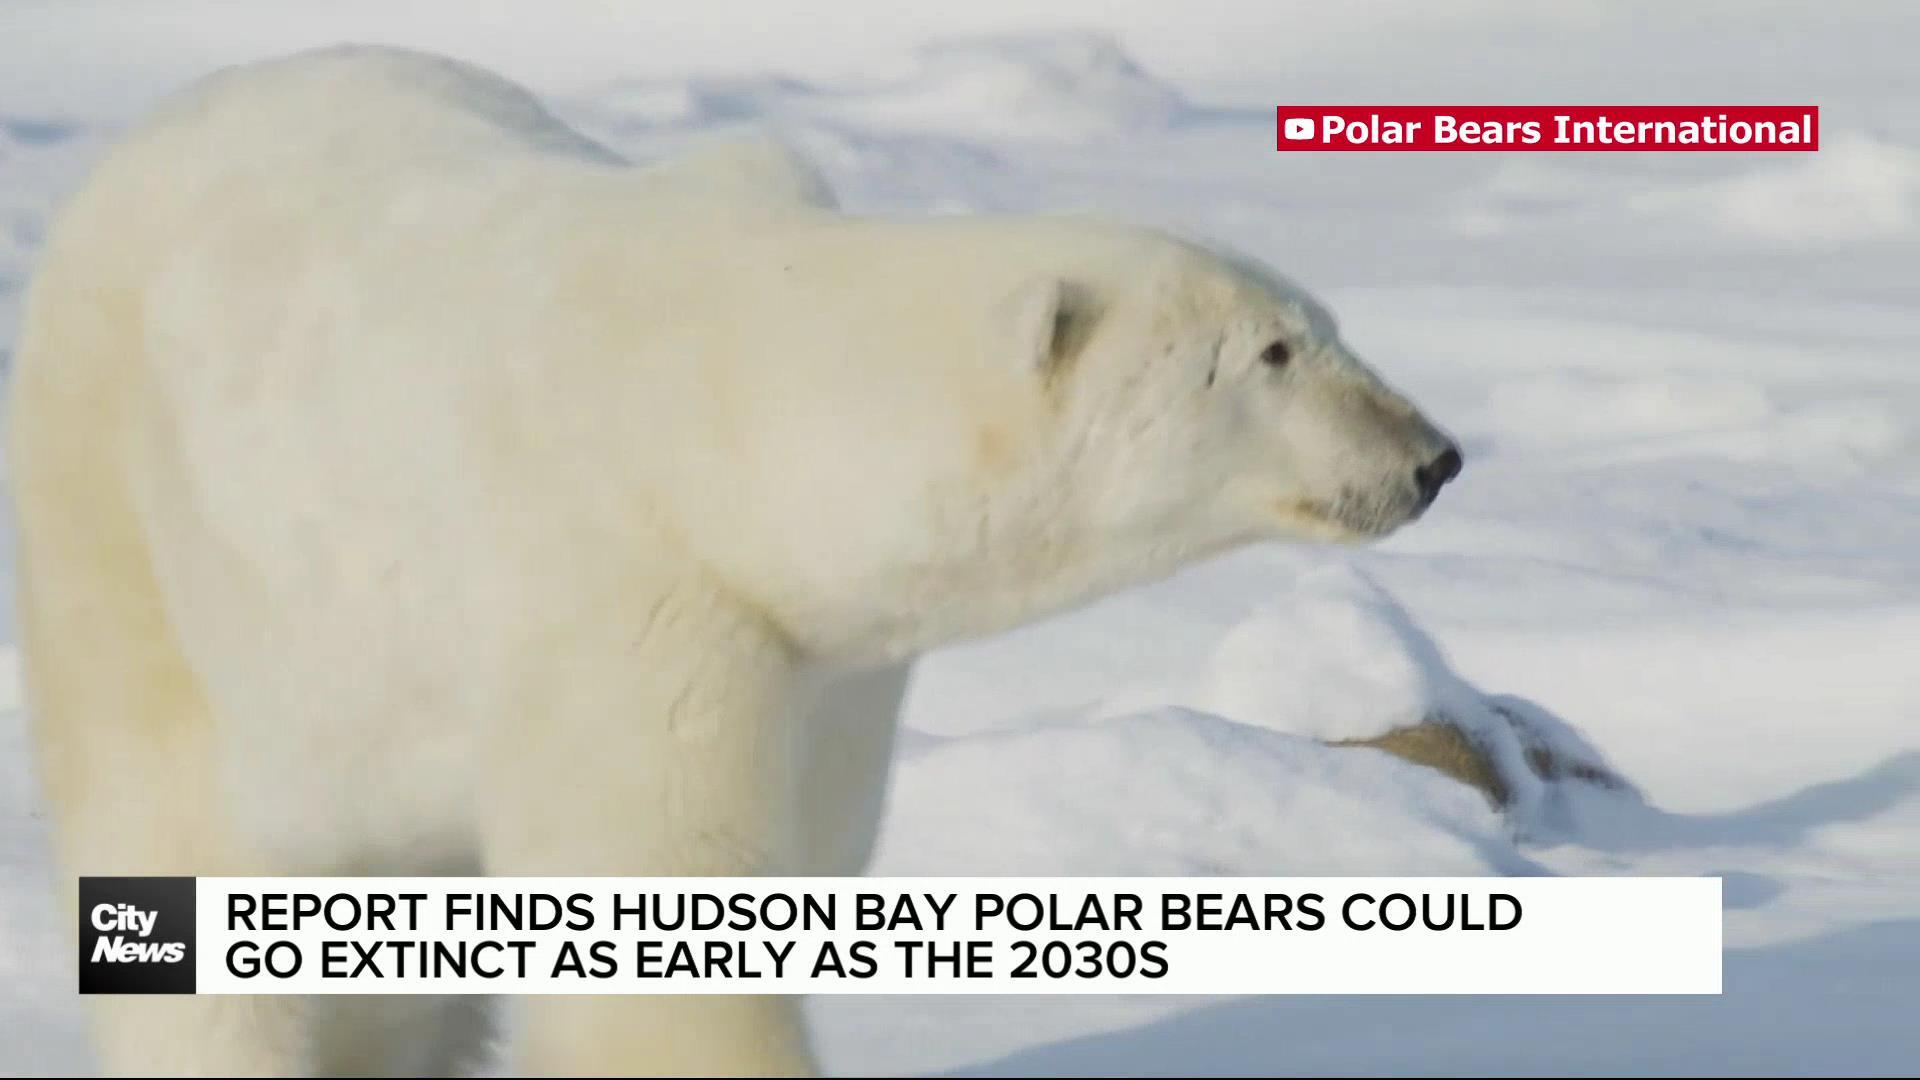 Hudson Bay polar bears at threat of being extinct as early as in the 2030s